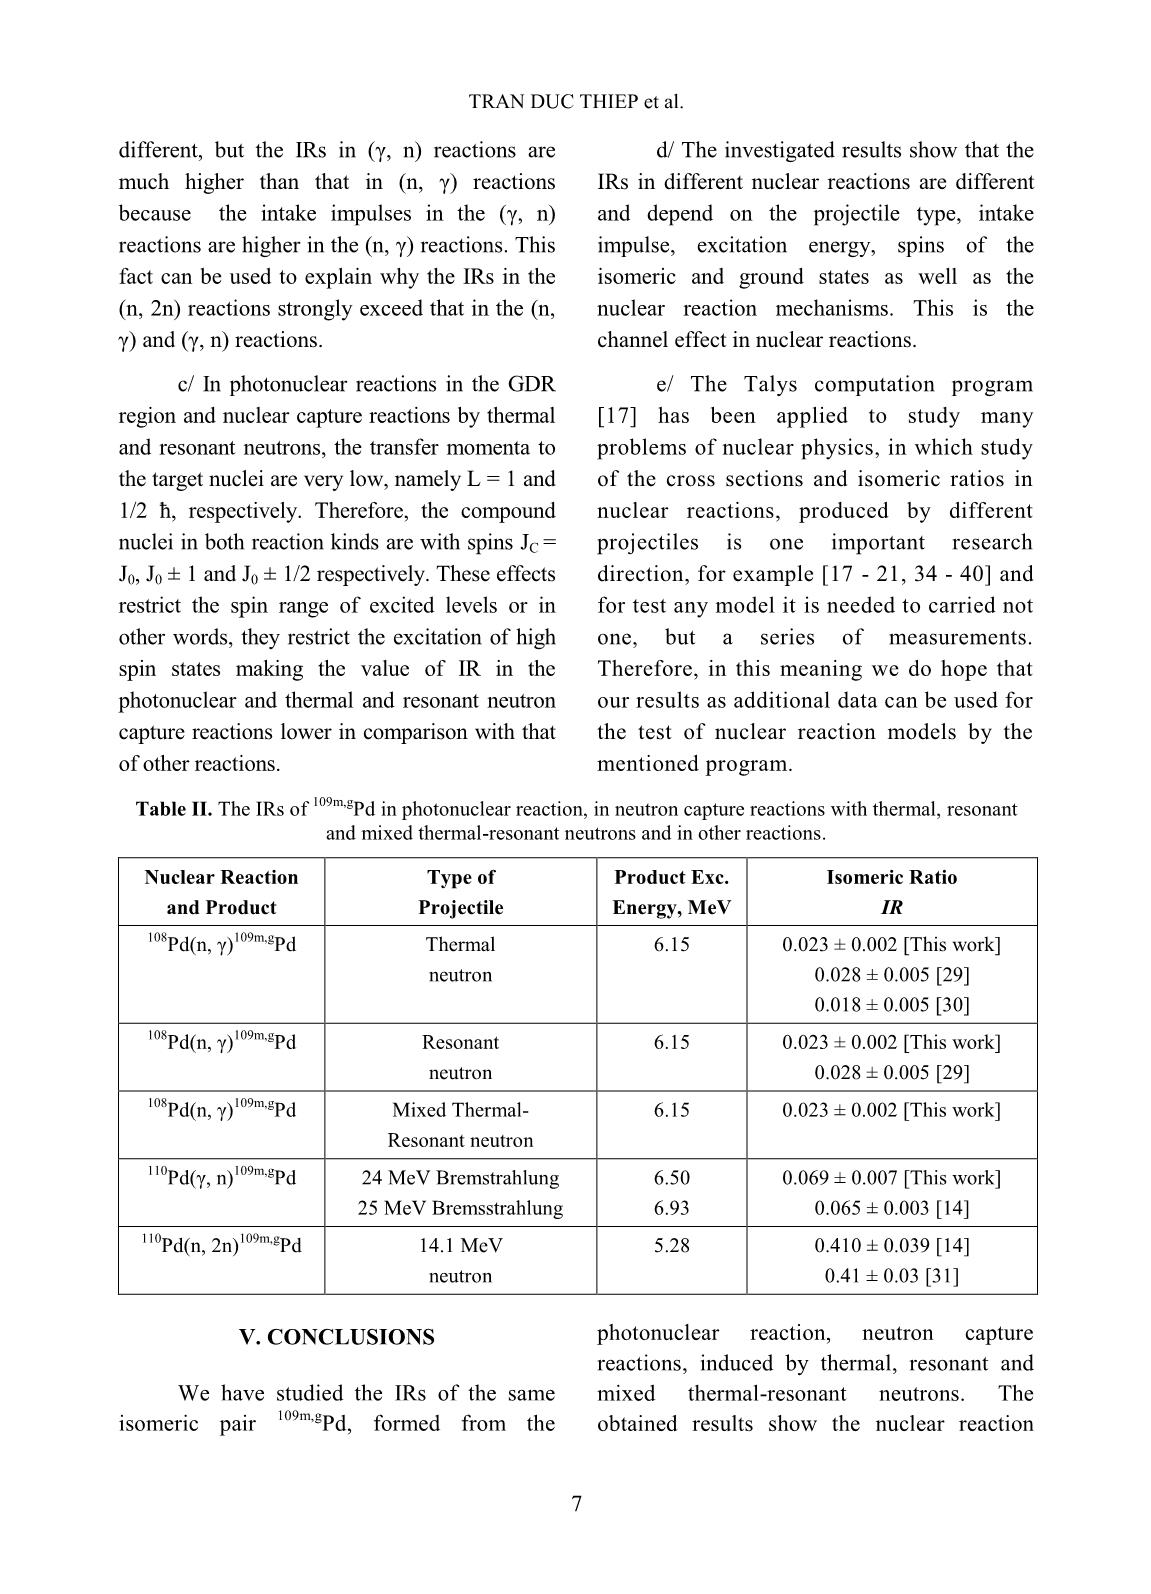 Nuclear Science and Technology - Volume 10, Number 1, March 2020 trang 10